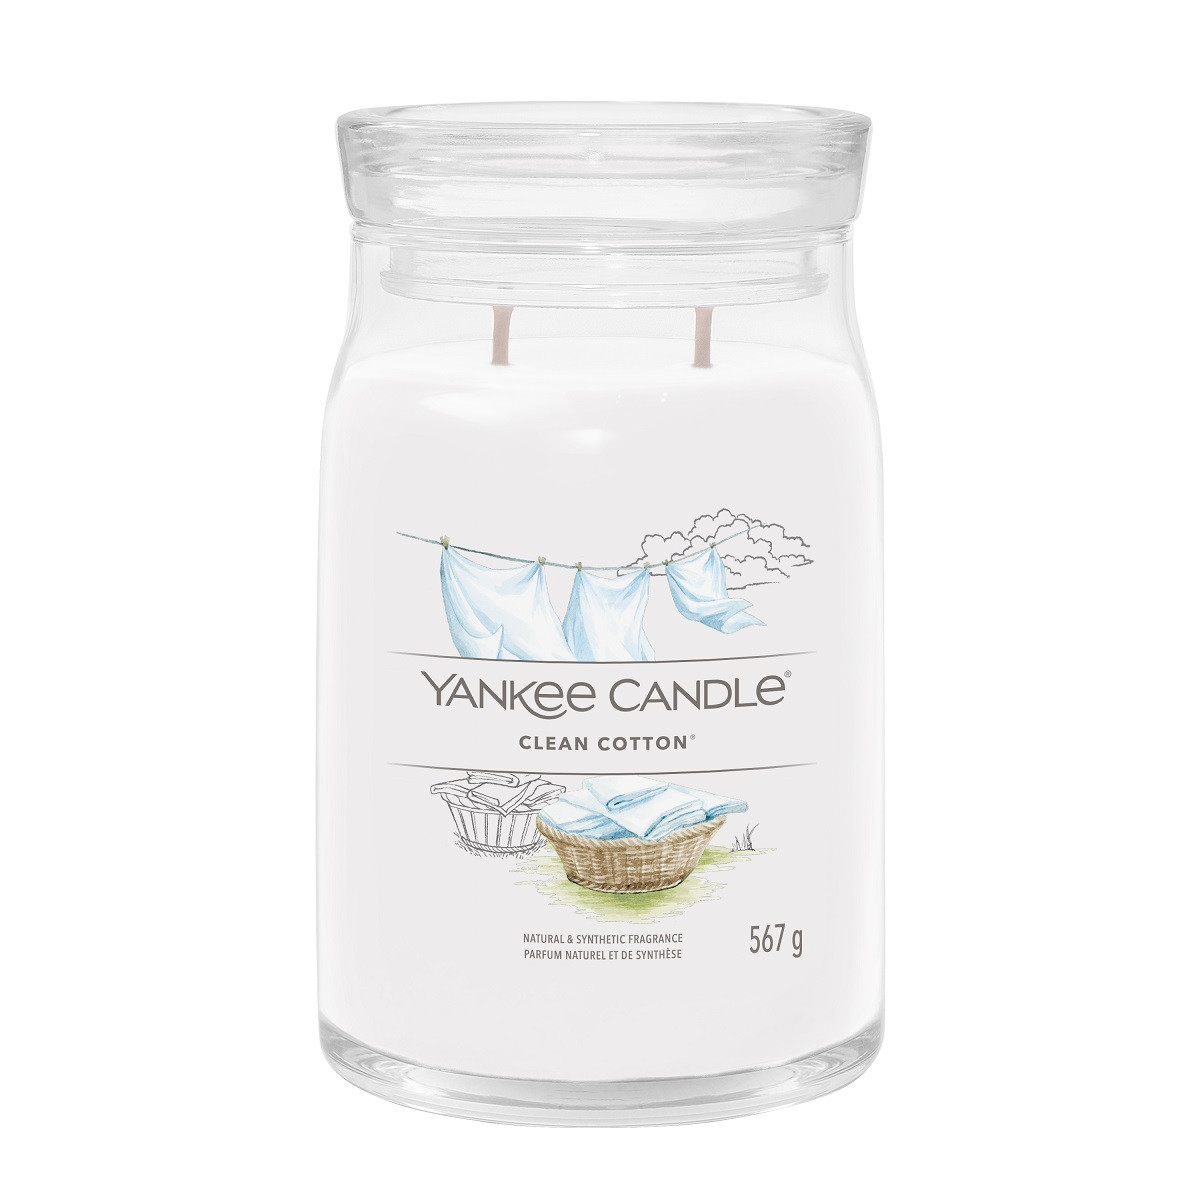 Yankee Candle® Clean Cotton® Signature Glas 567g, 34,90 €